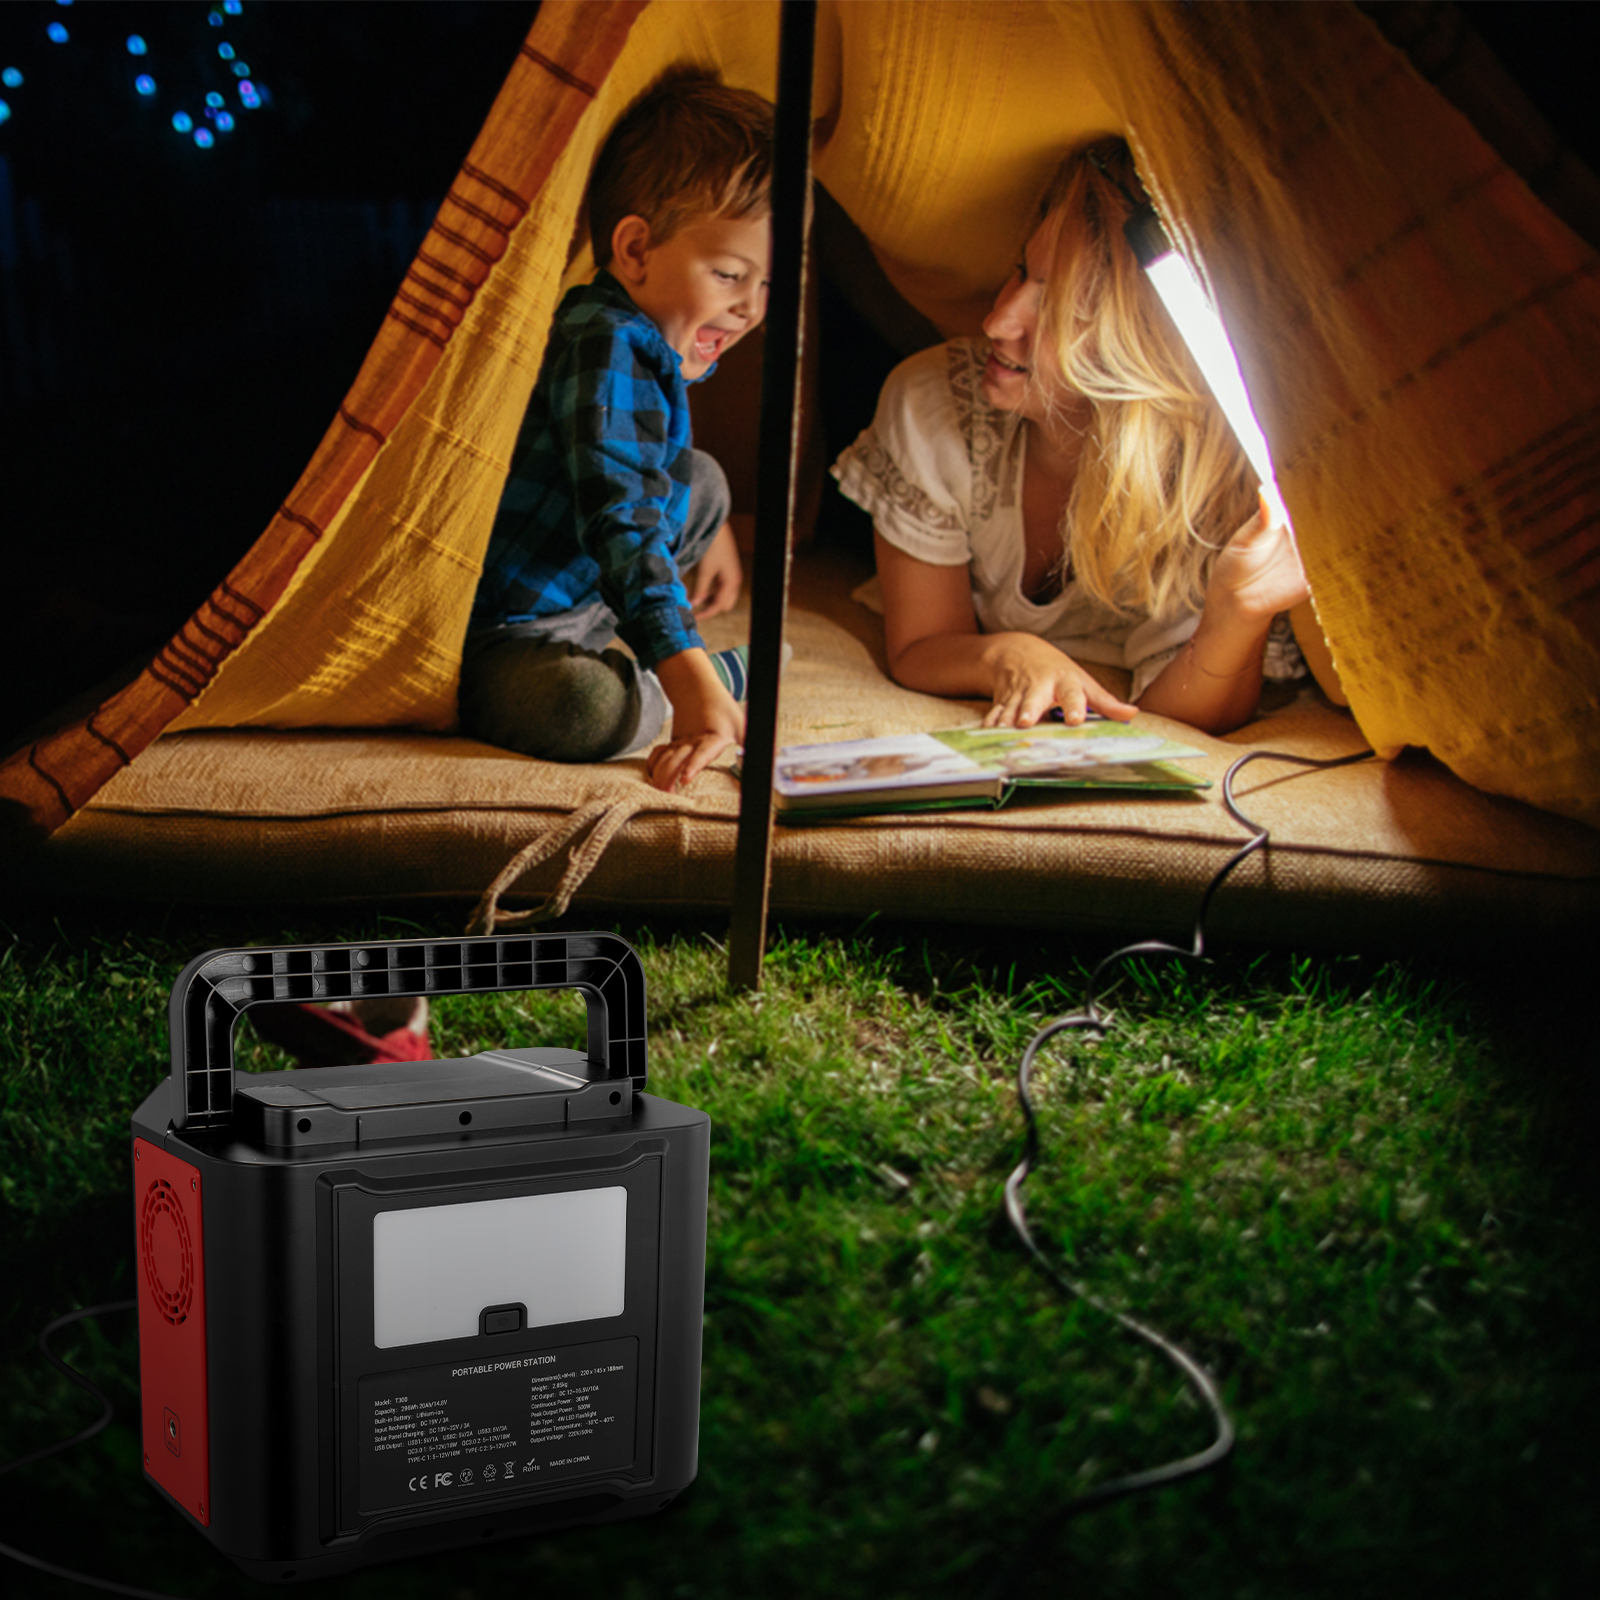 How to choose outdoor energy storage power supply and generator?